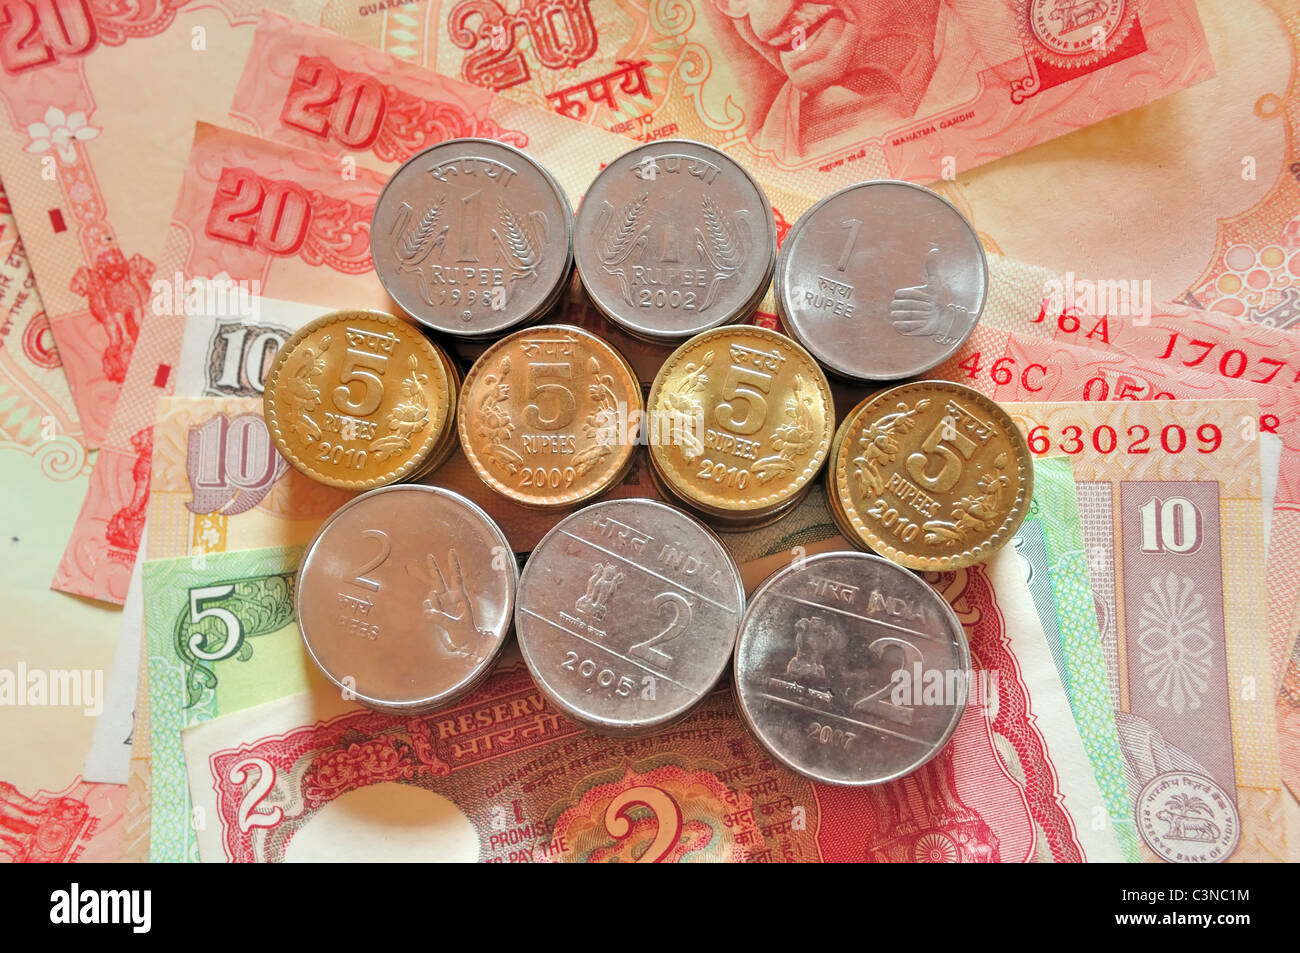 Stack of Indian currency coins on some Indian currency bank notes Stock Photo